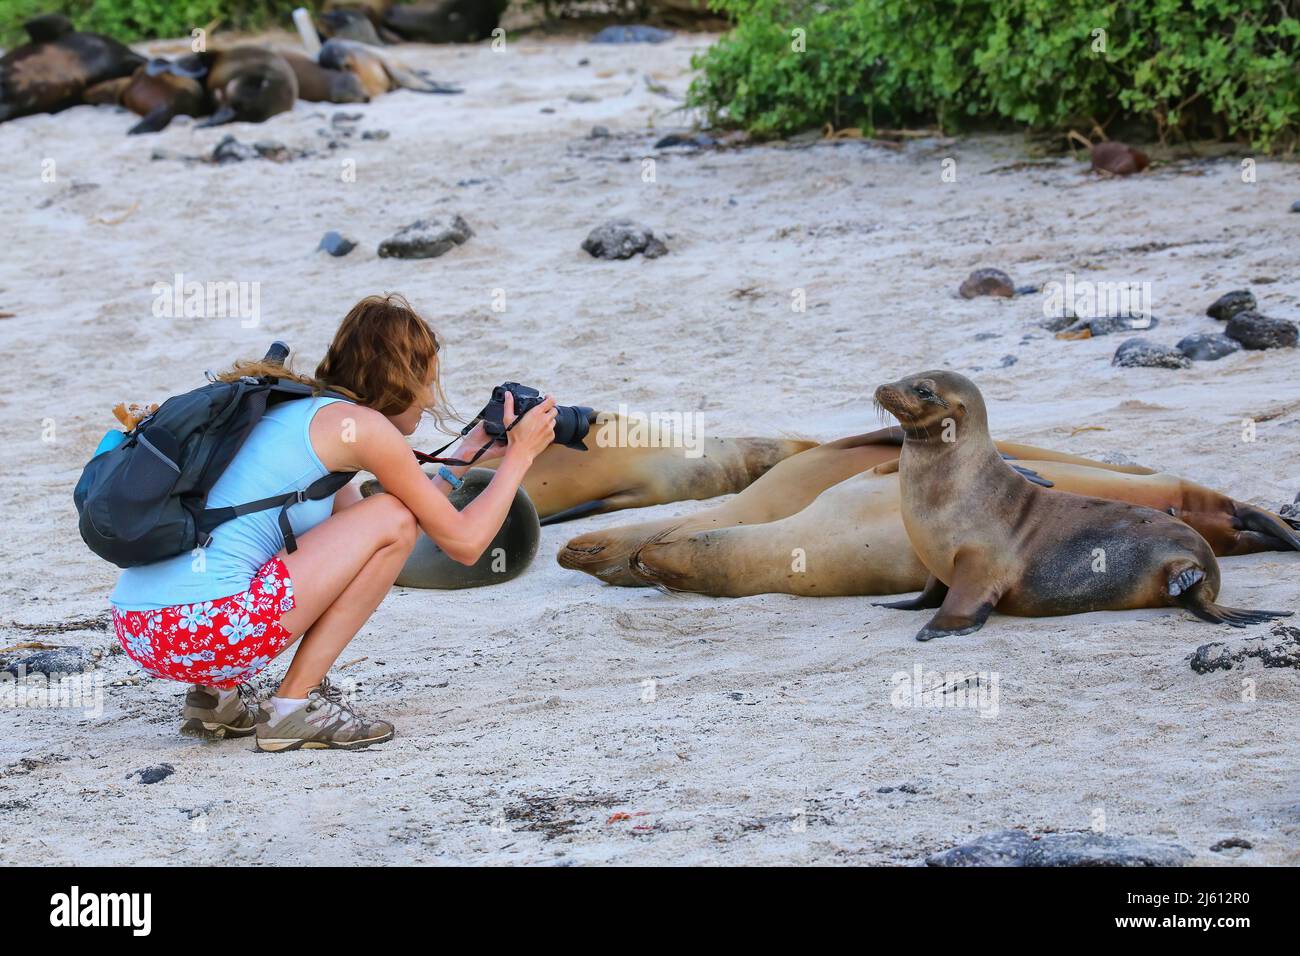 Tourist photographing friendly Galapagos sea lions on Santa Fe Island, Galapagos National Park, Ecuador. They are the smallest sea lion species. Stock Photo